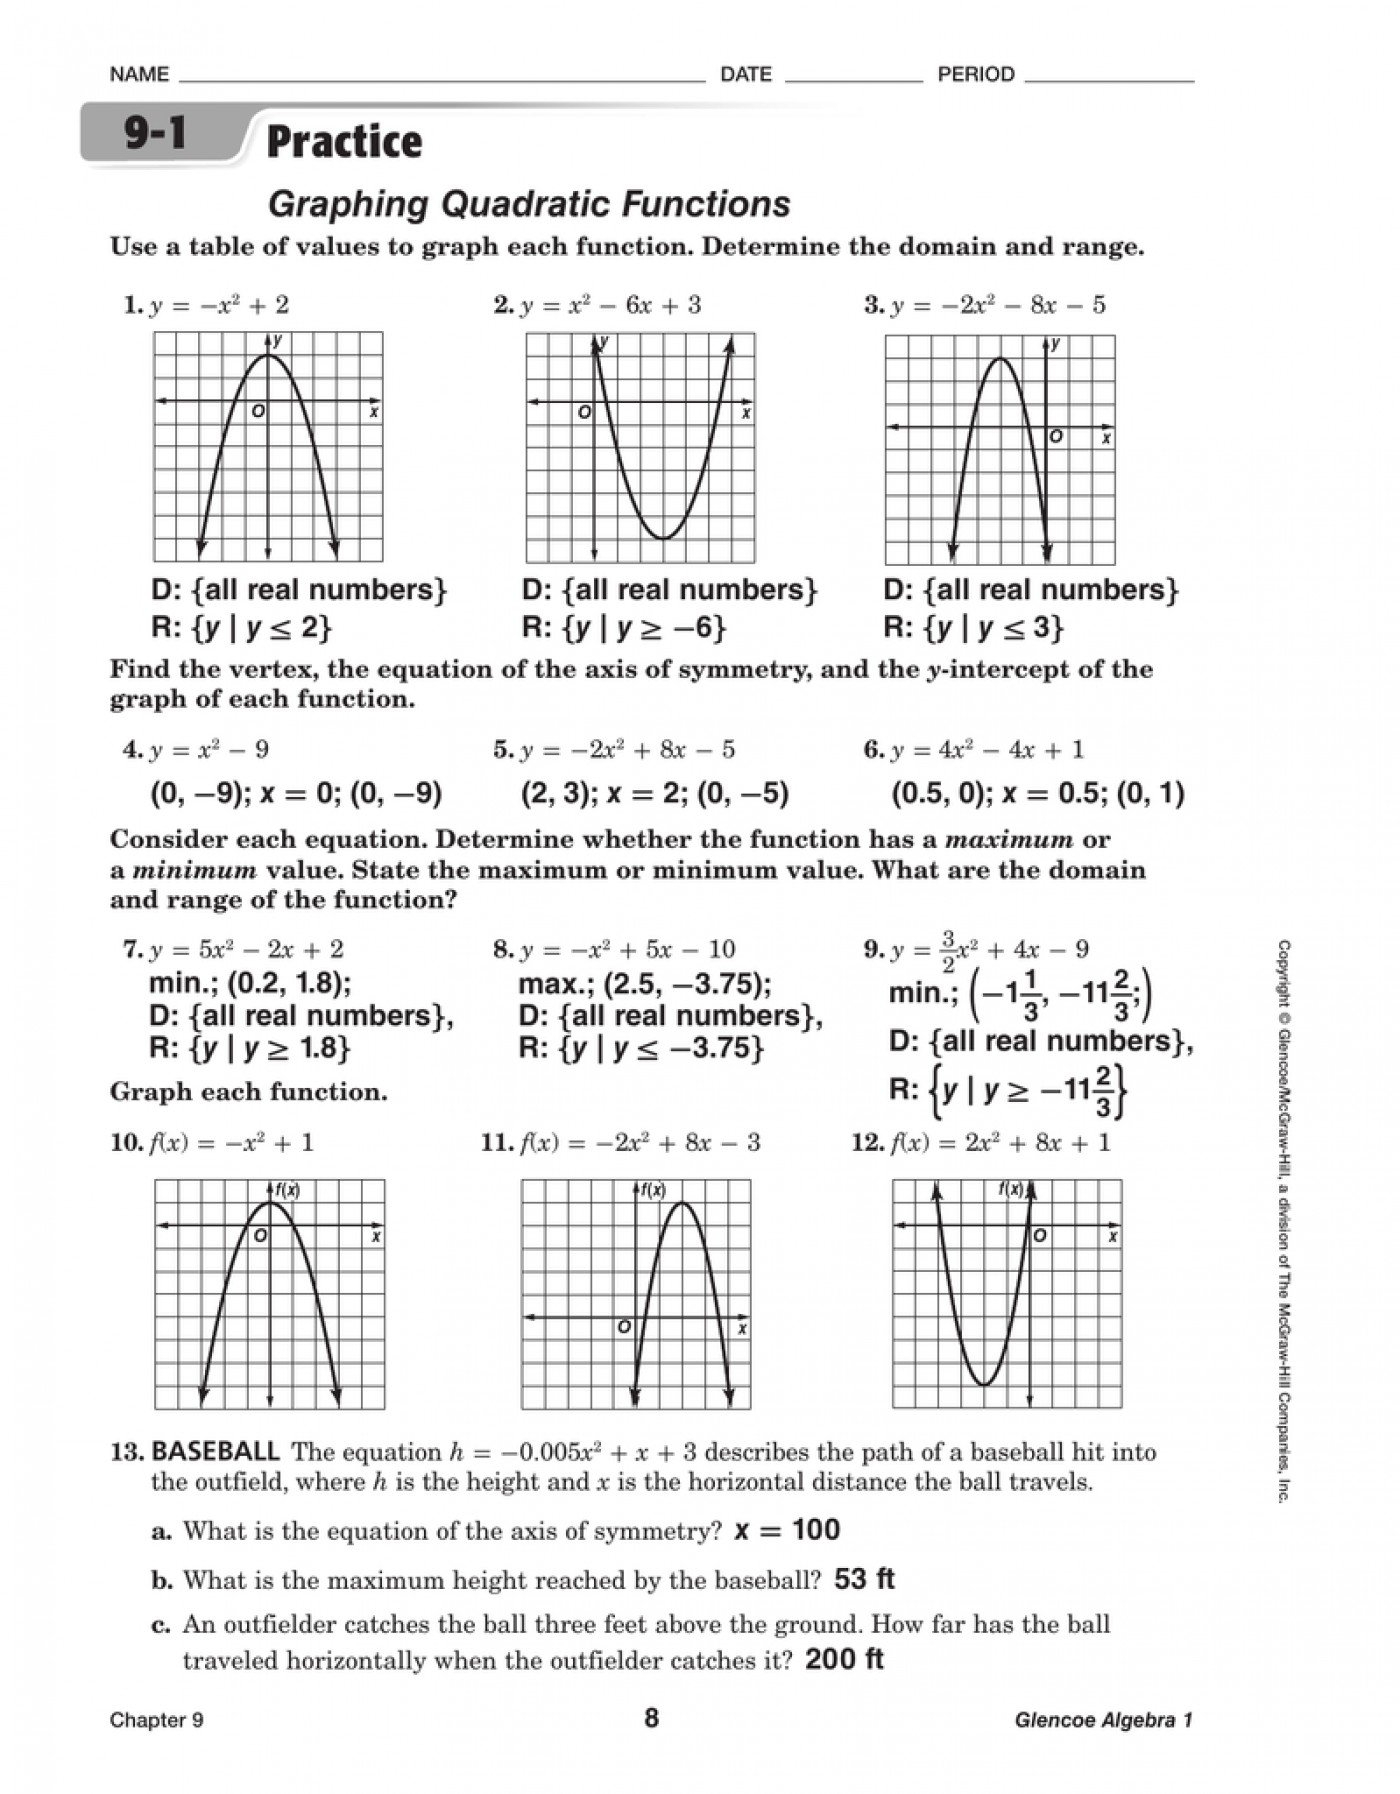 Graphing Quadratic Functions In Vertex Form Worksheet Inside Practice Worksheet Graphing Quadratic Functions In Vertex Form Answers